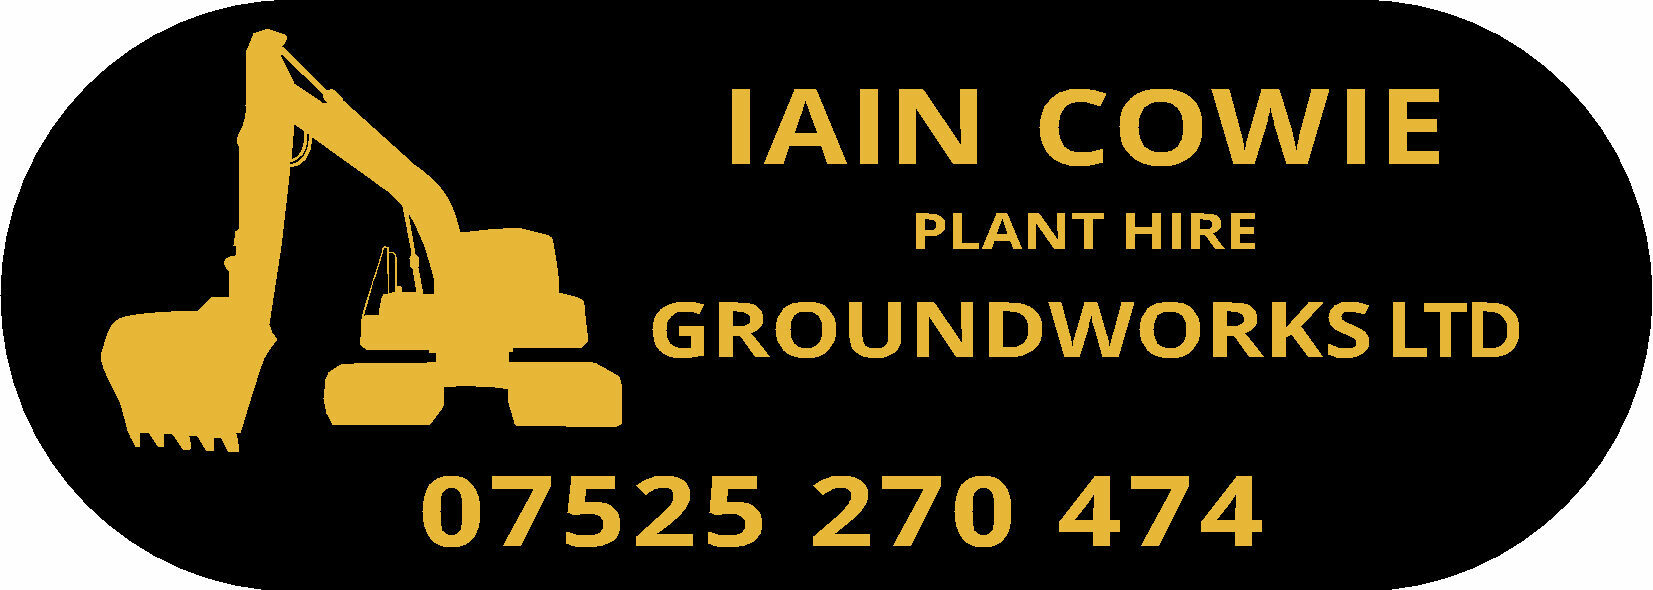 Iain Cowie Plant Hire & Groundworks